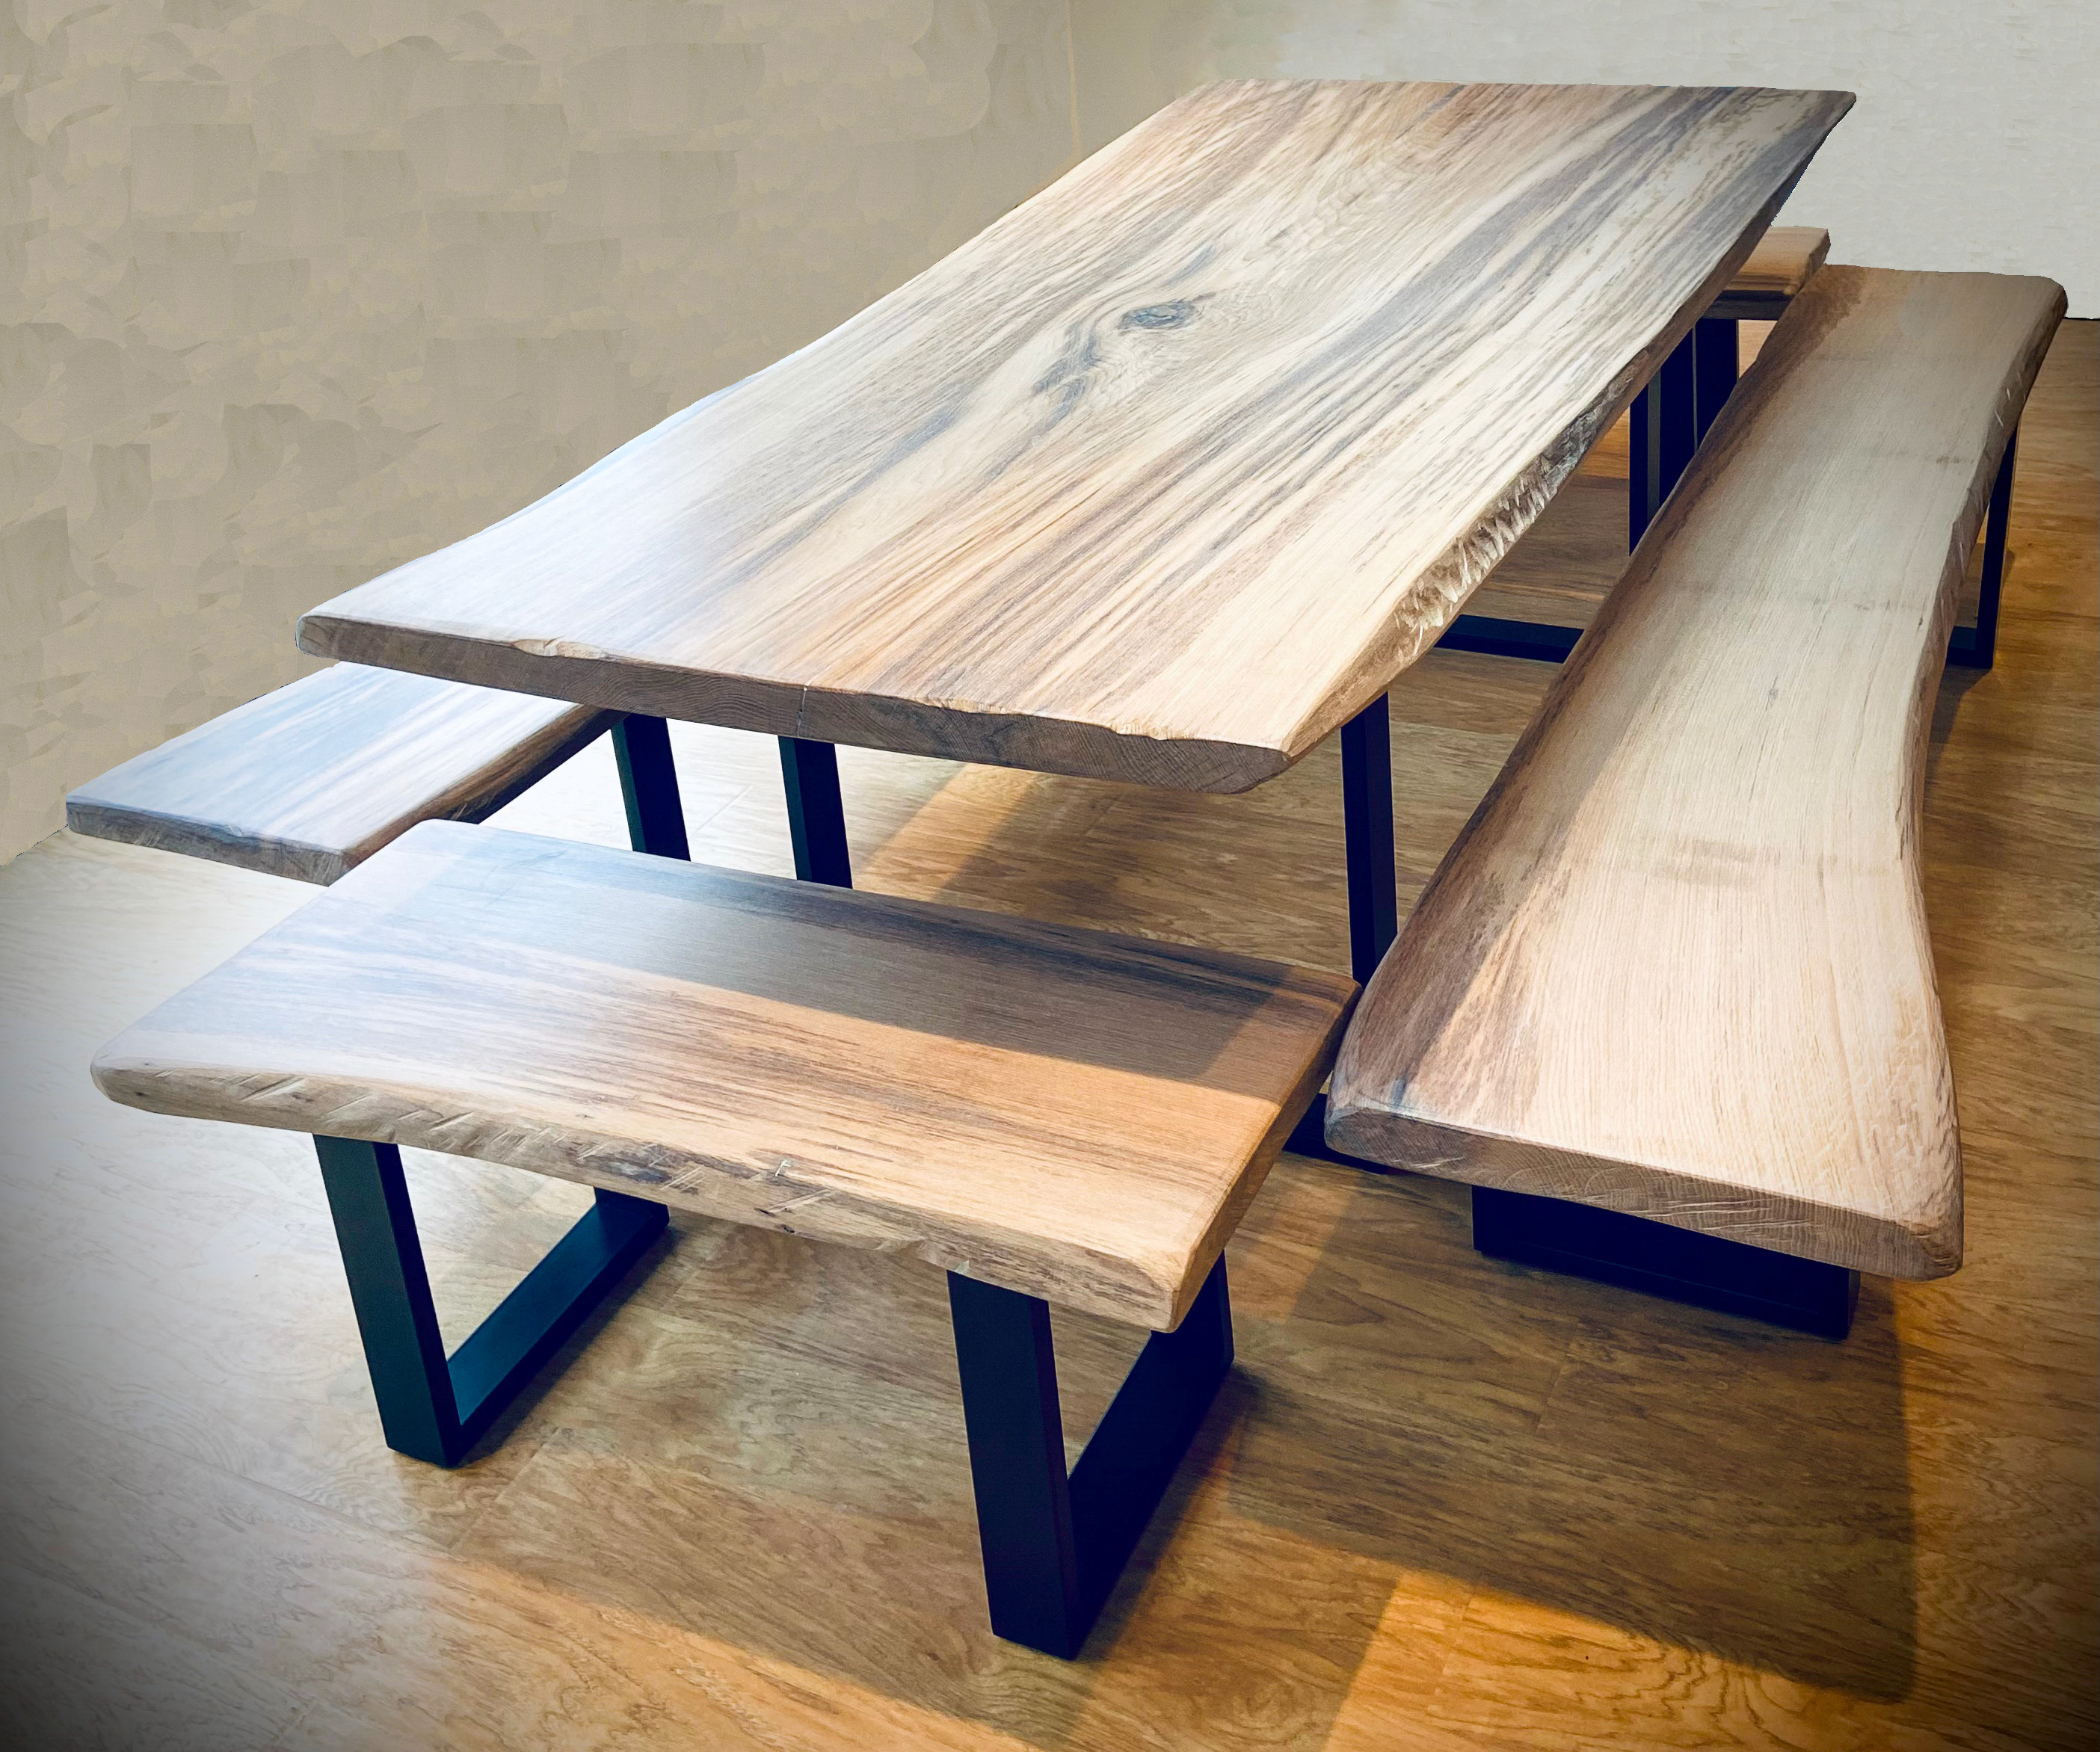 Custom made oak dining table with benches